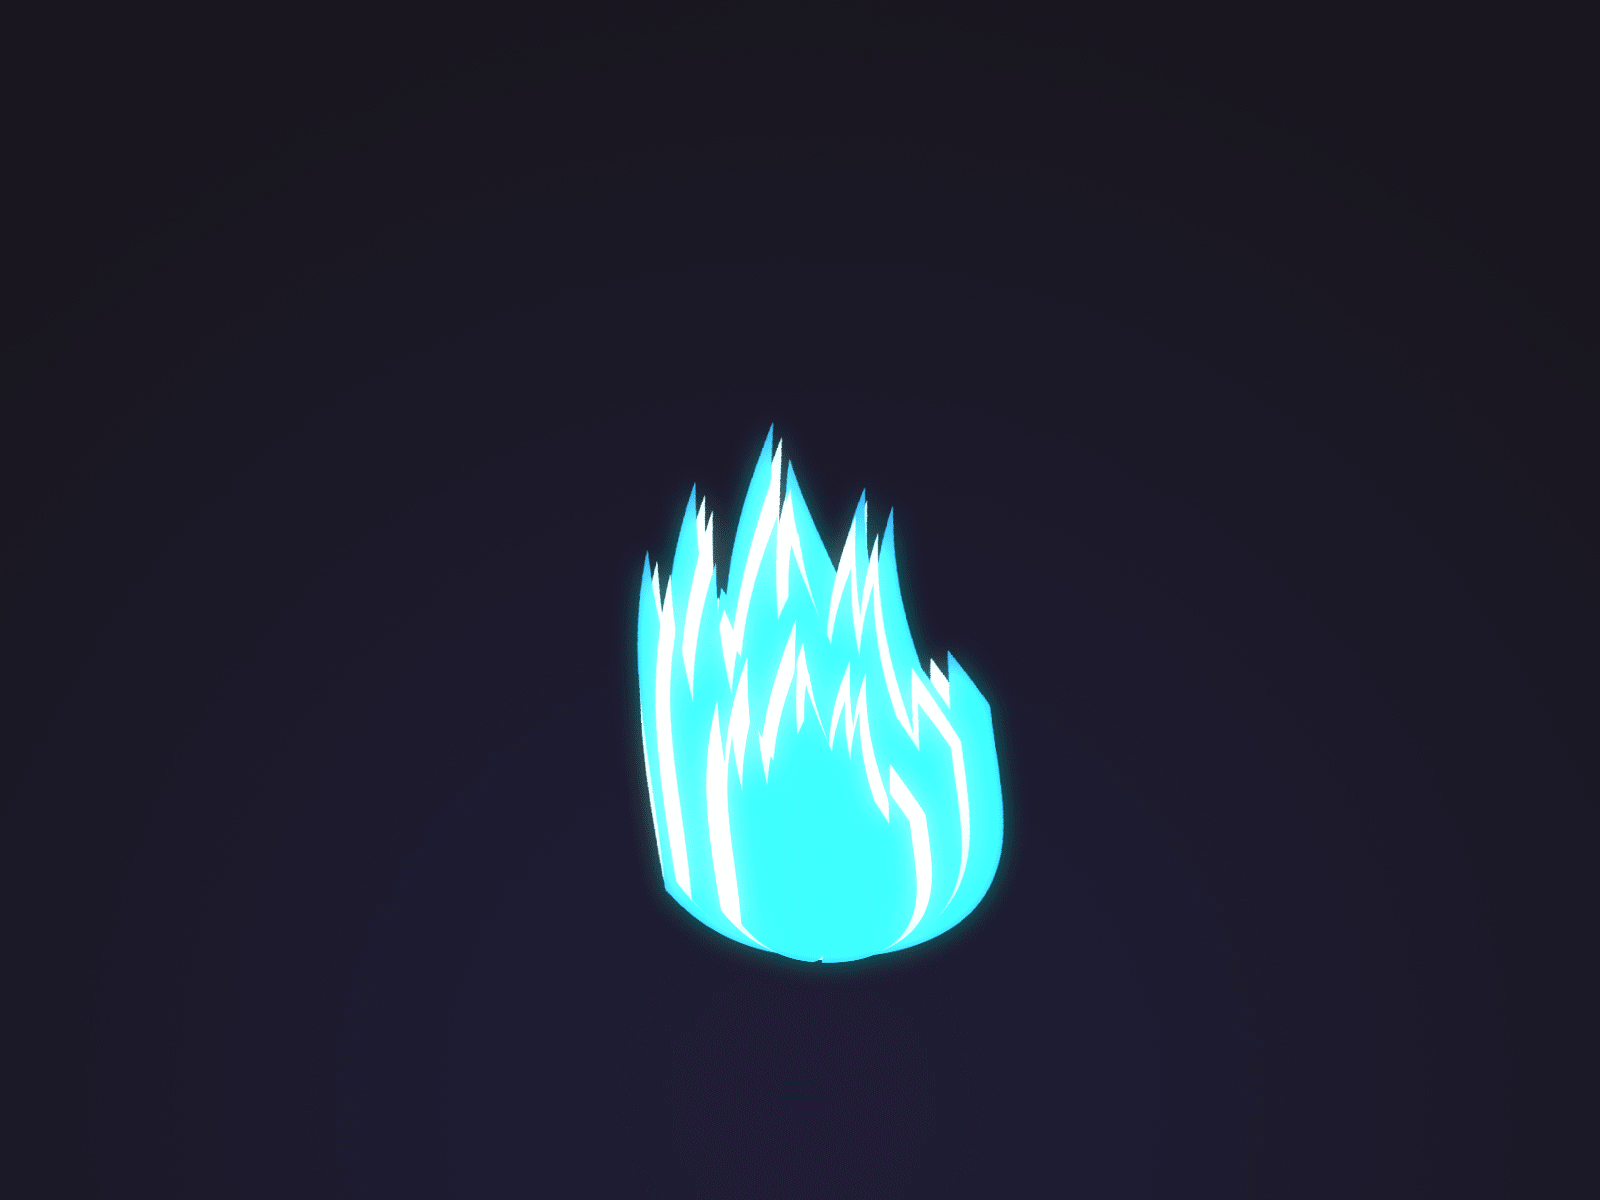 Day 3 - Blue Flame